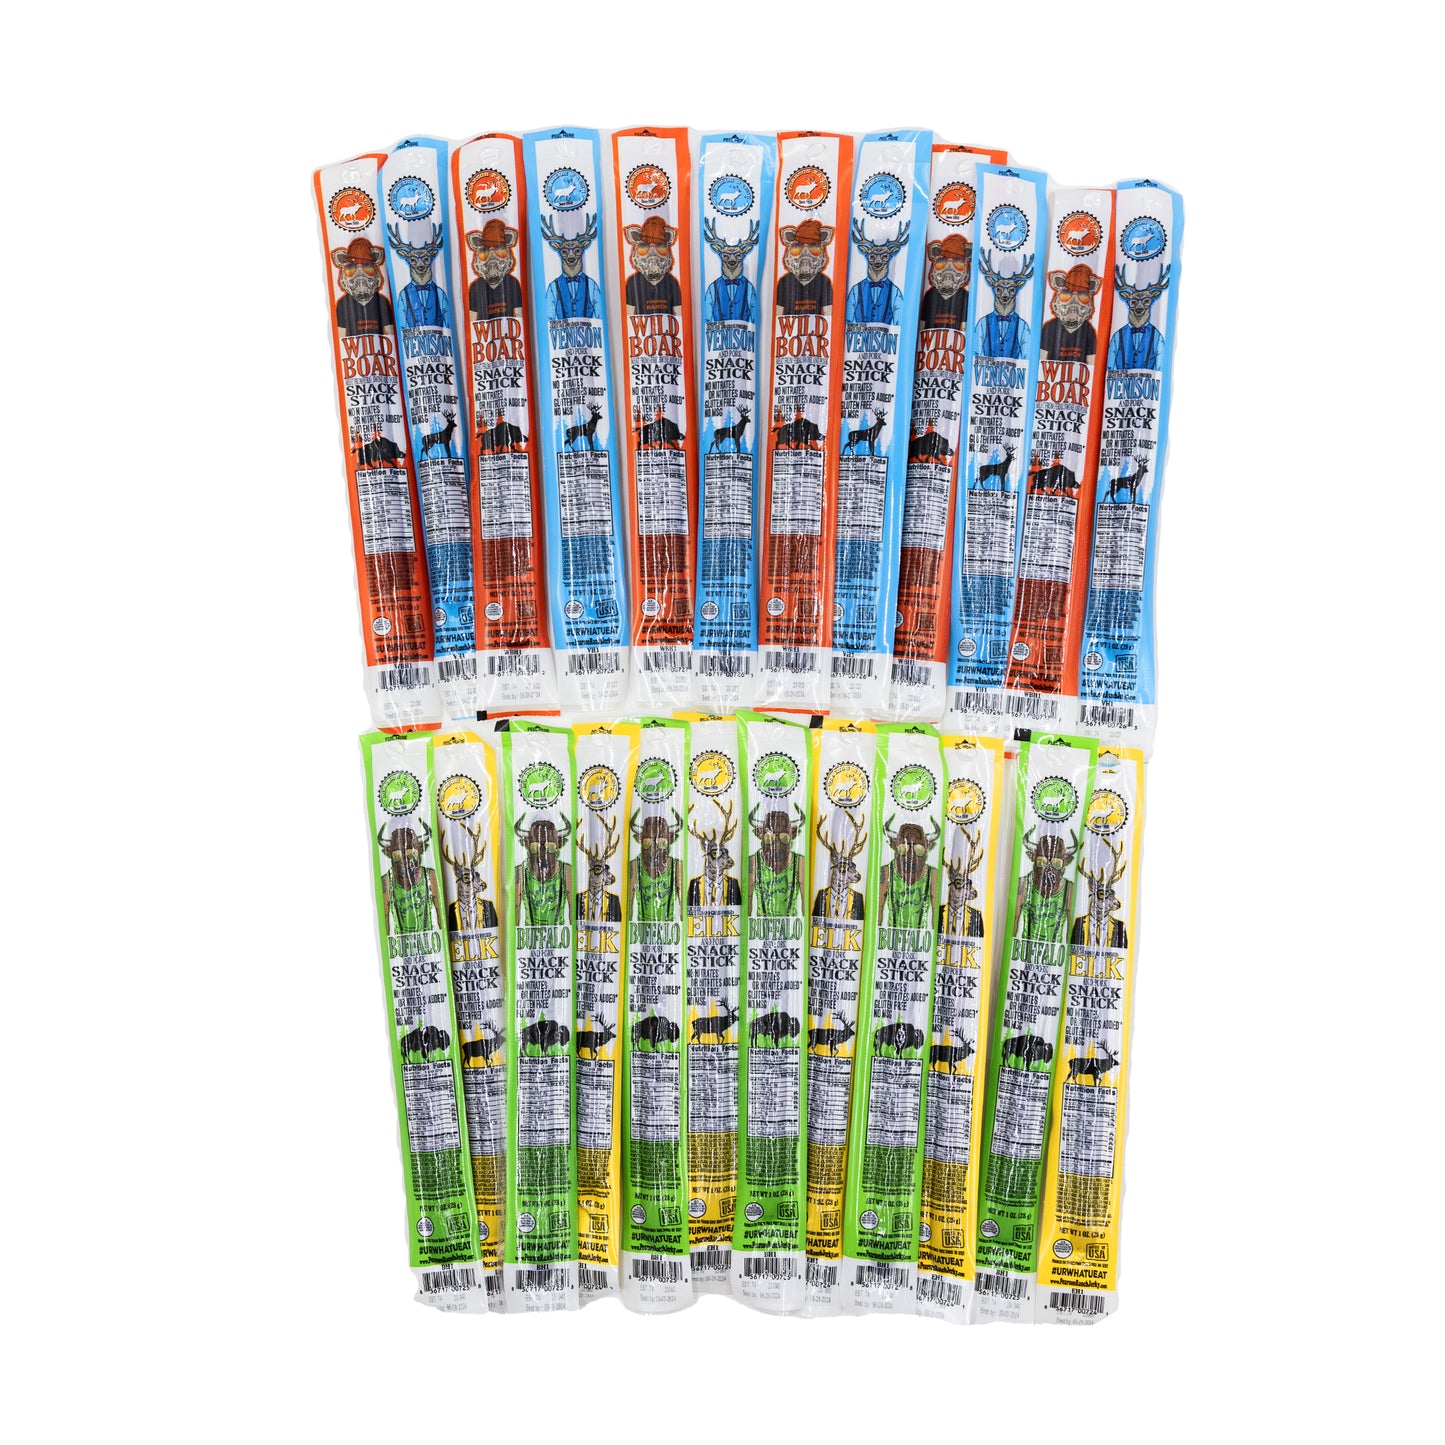 The Snack Attack - Snack Stick Variety Pack - SAVE 25% - Pearson Ranch Jerky